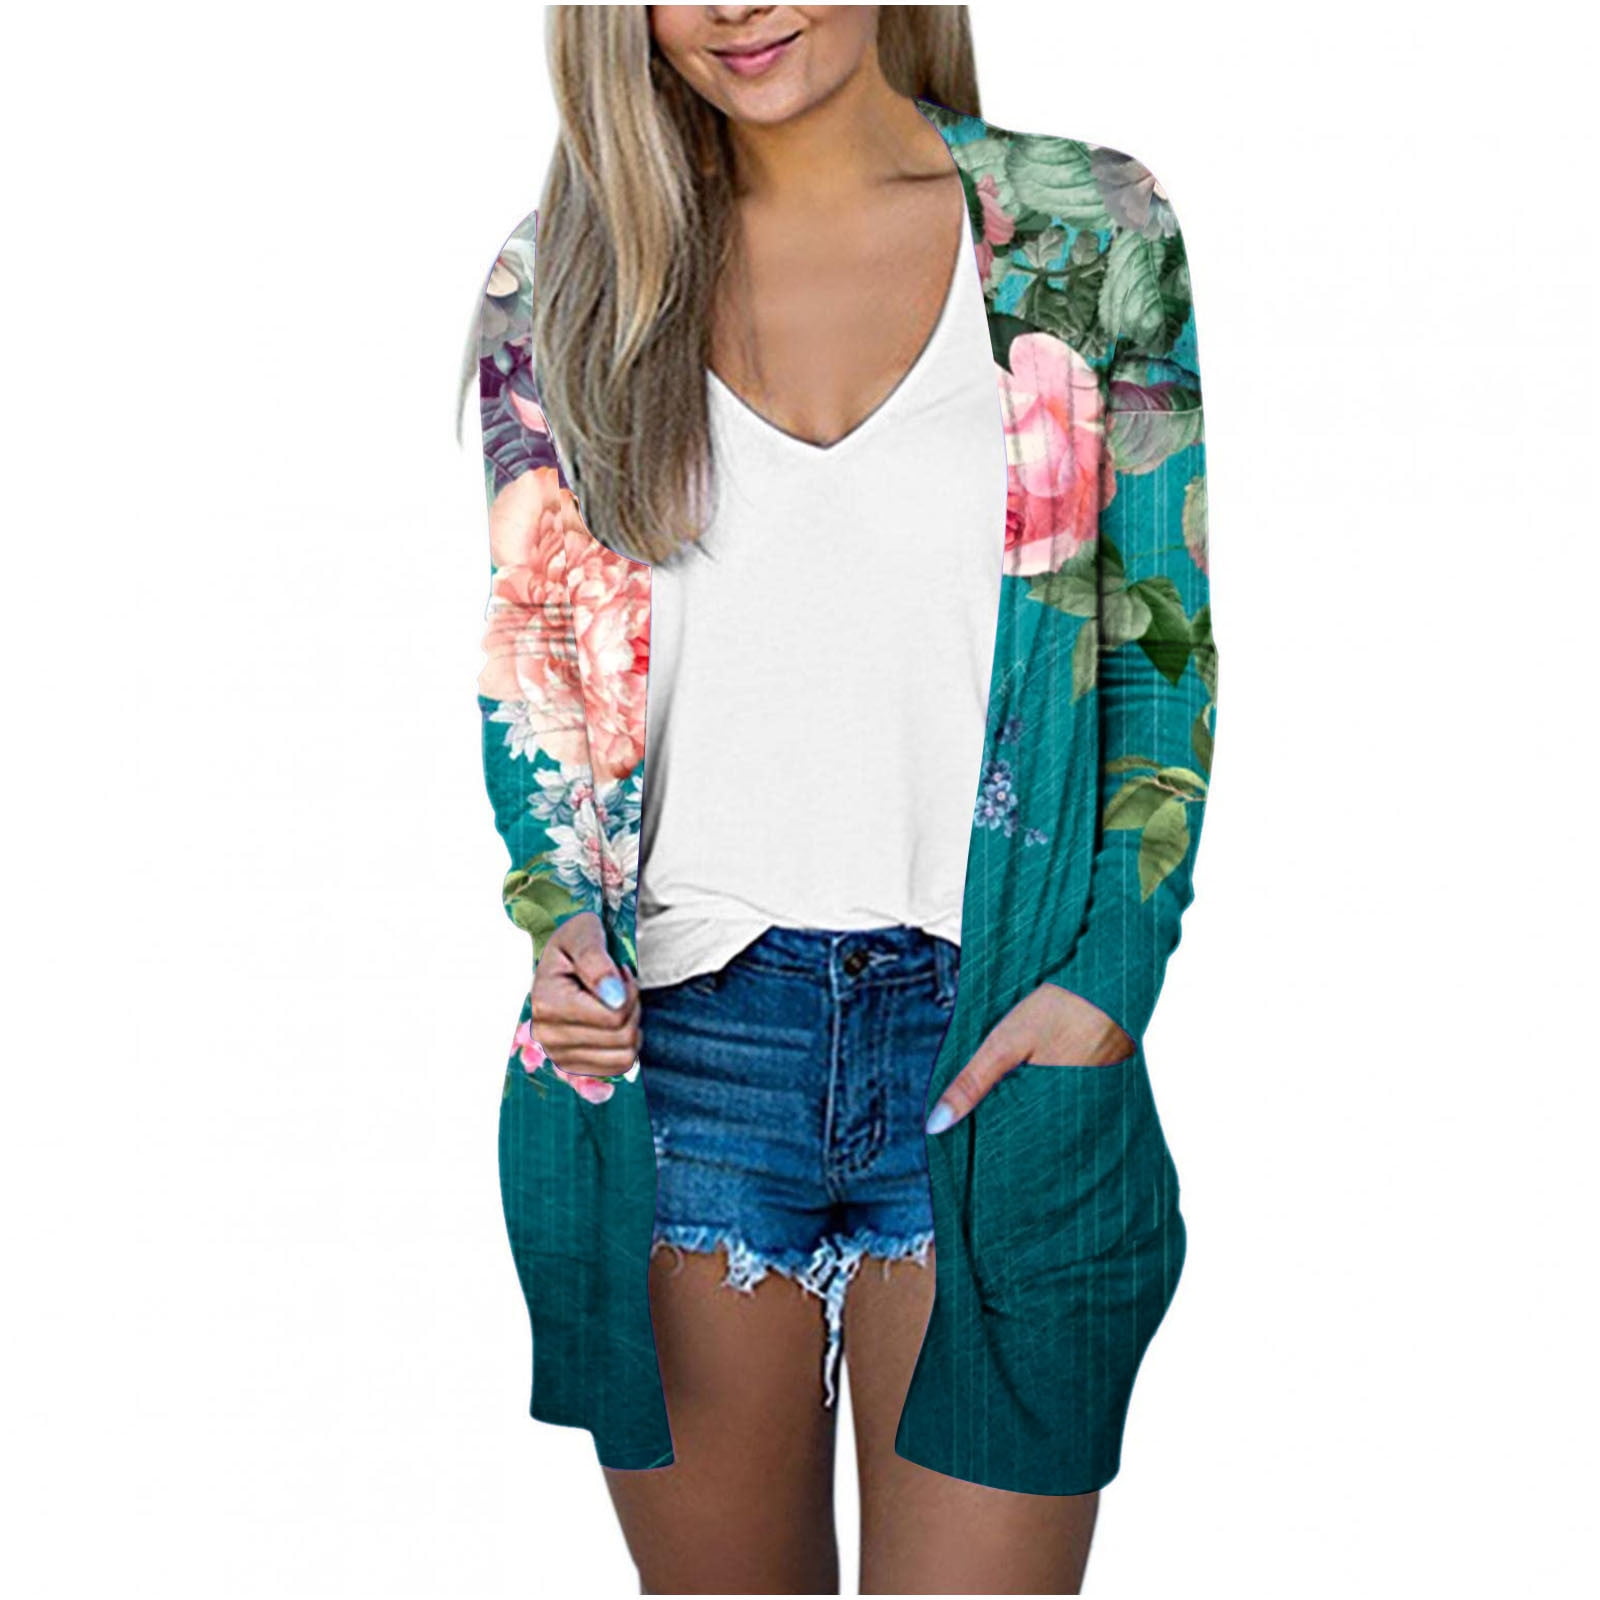 Olyvenn 2023 Trendy Women's Printing Long Sleeve Casual Tops Blouse With  Pocket Cardigan Outwear Lightweight Open Front Soft Drape Fall Cardigan  Green